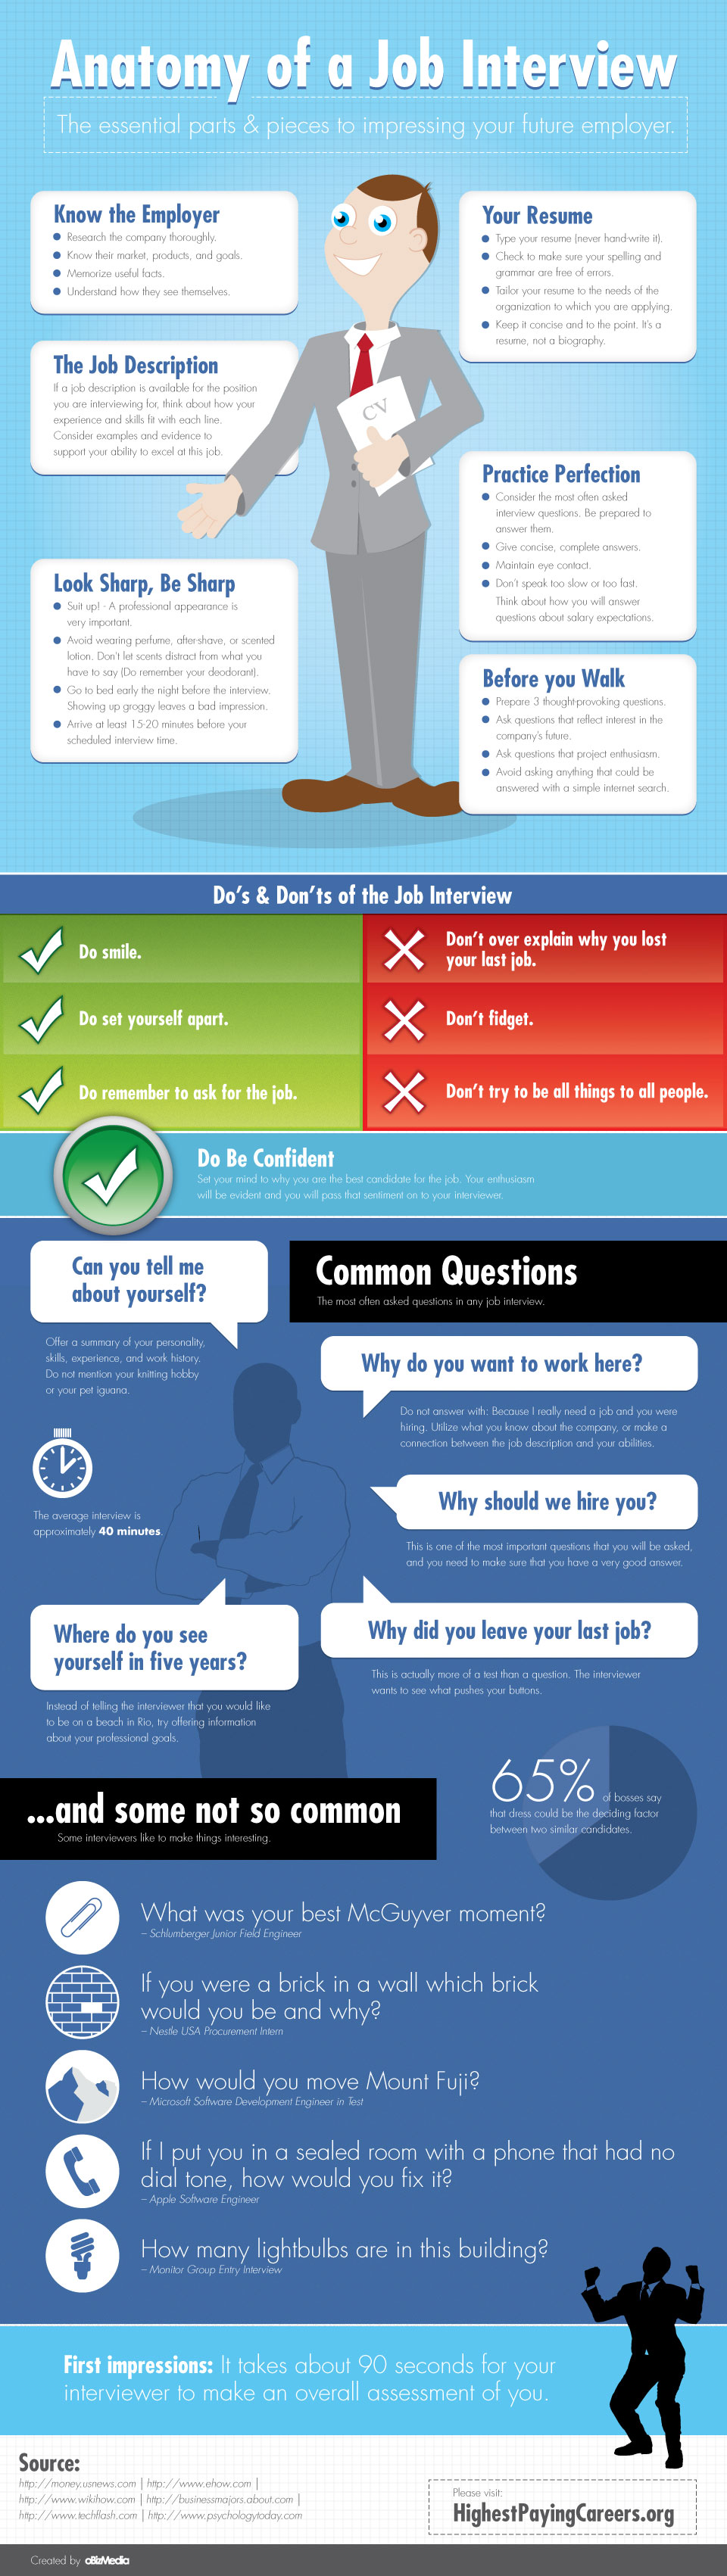 anatomy-of-a-job-interview